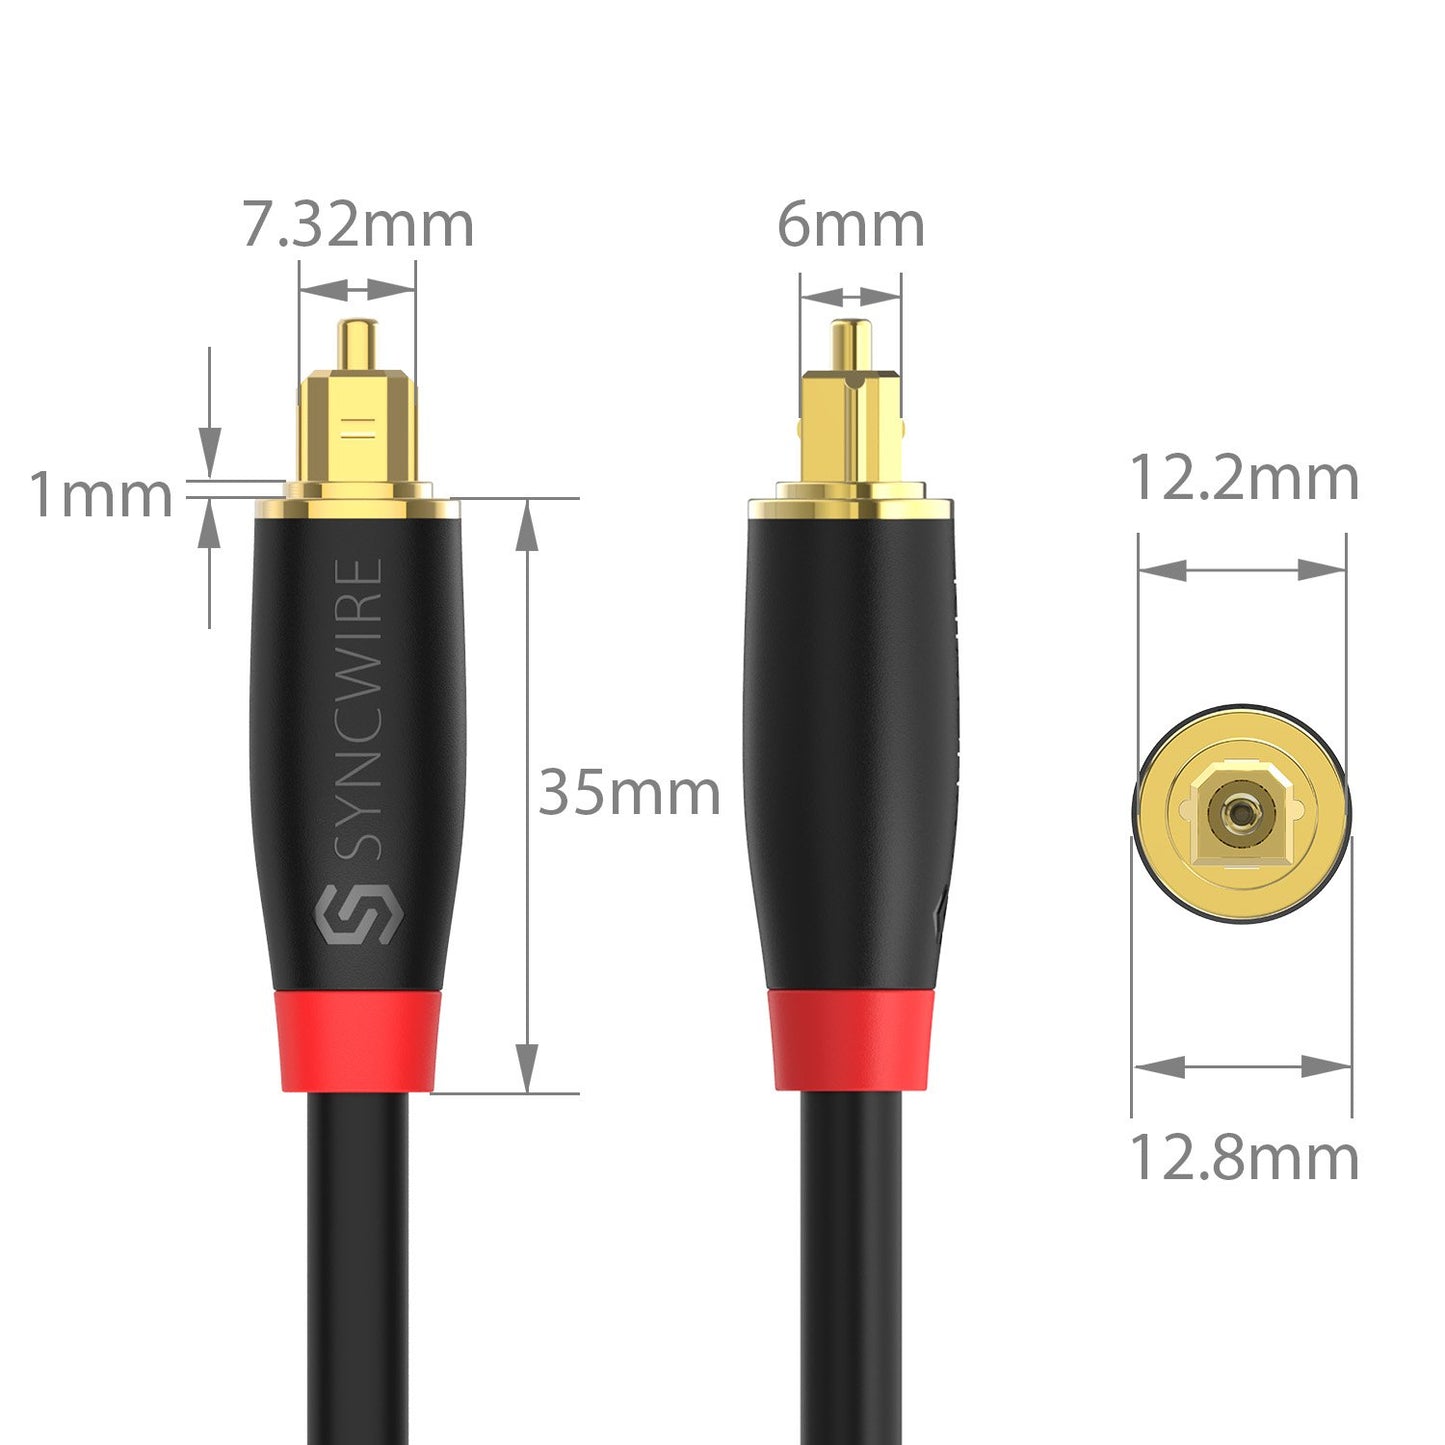 Syncwire Digital Optical Audio Cable 15 Feet - Toslink Cable [24K Gold-Plated, Ultra-Durable] Fiber Optic Male to Male Optical Cord for Home Theater, Sound Bar, TV, PS4, Xbox, Playstation & More